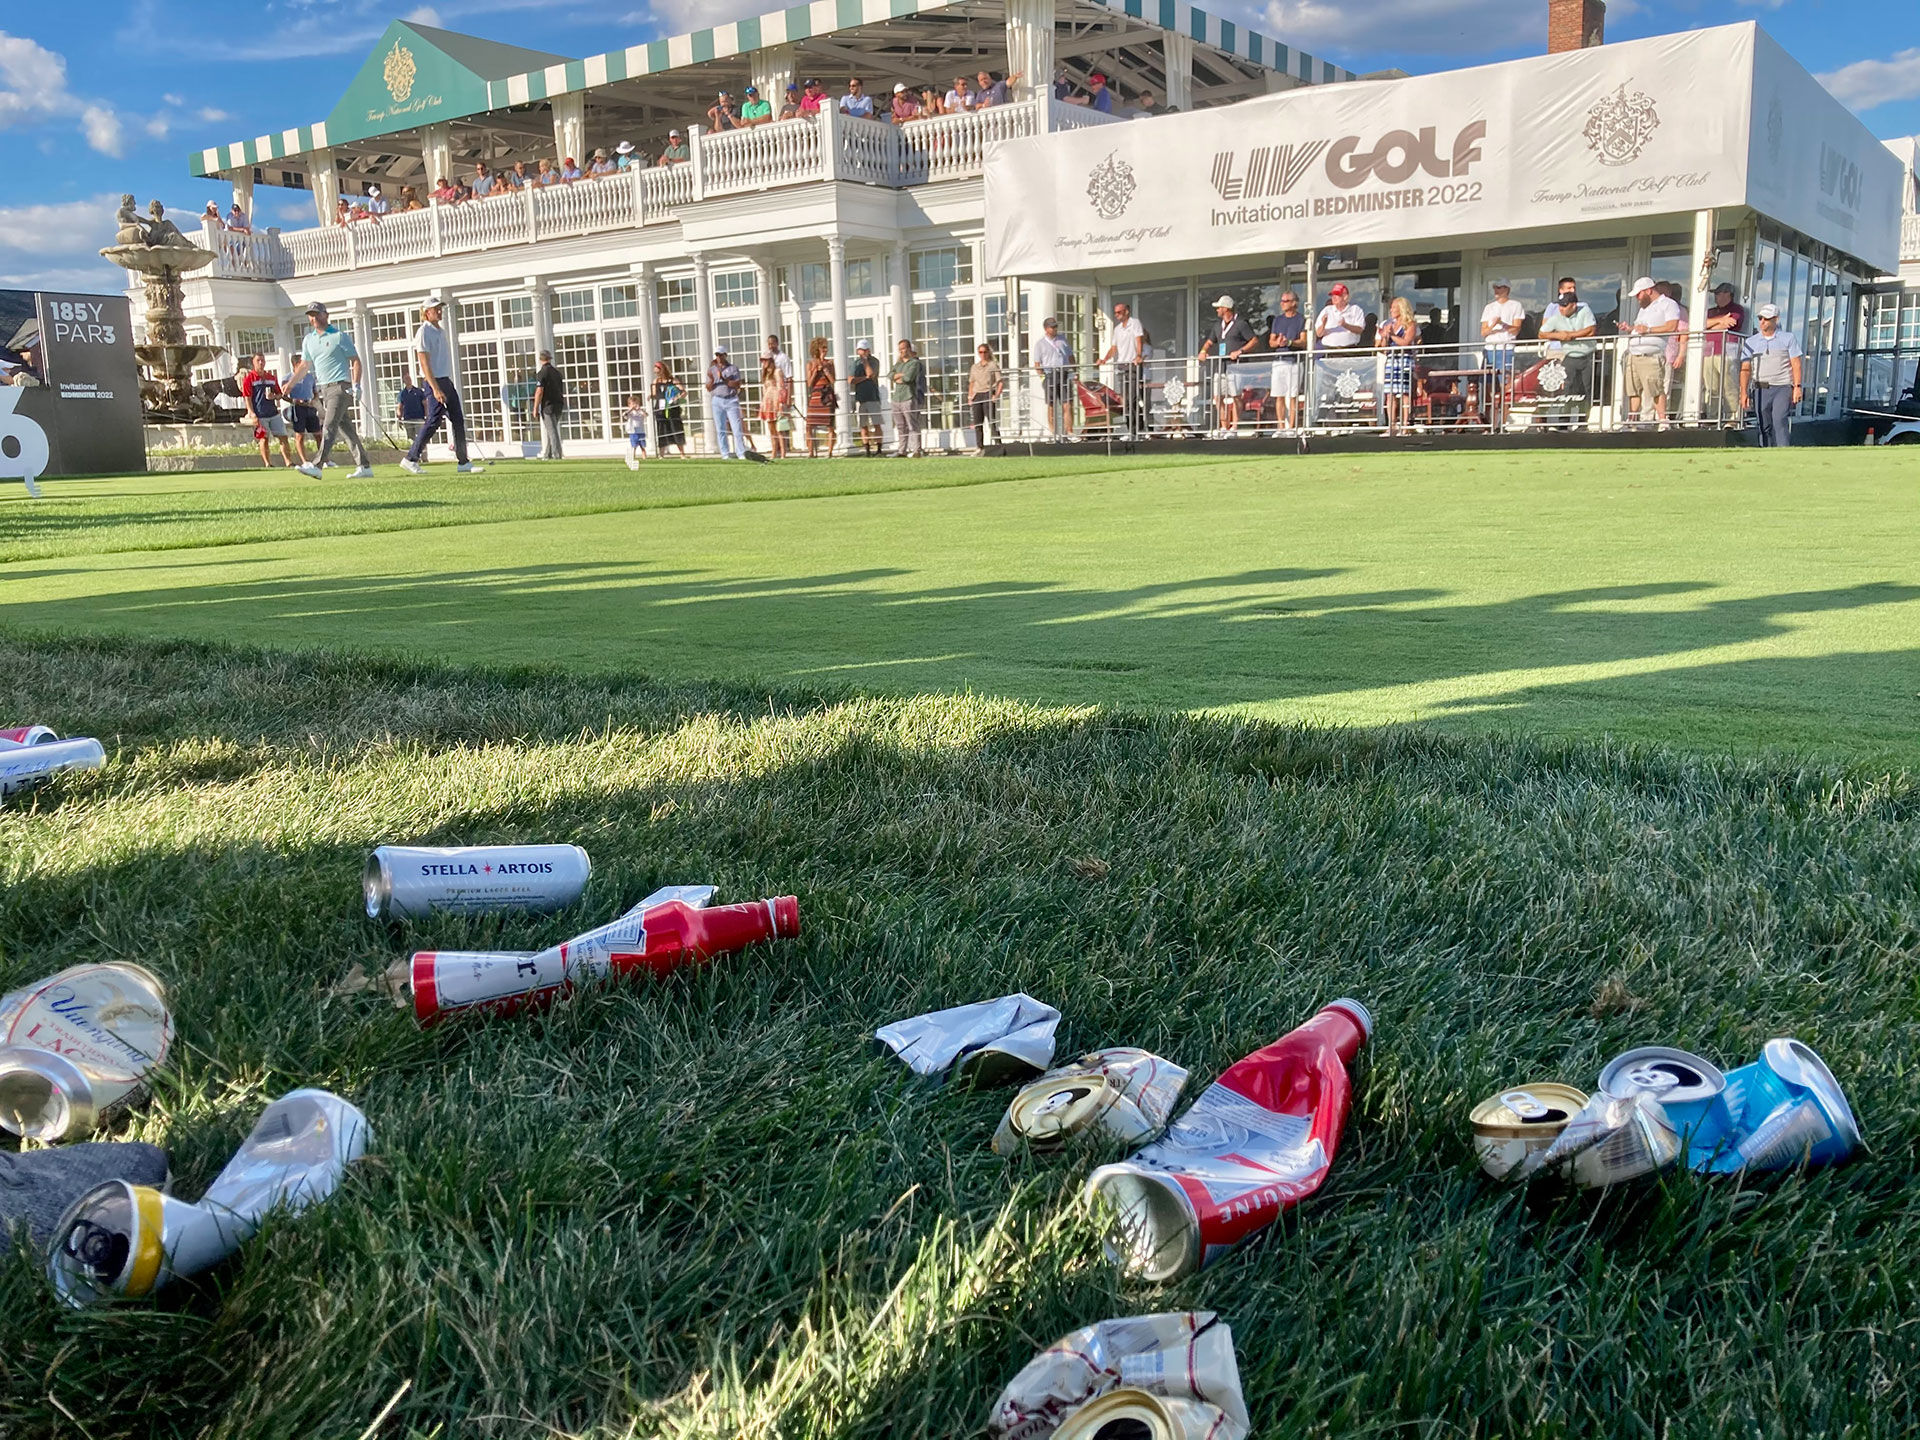 Beer cans are strewn alongside the 16th tee, after Eric Trump offered up the free beverages to fans at Trump National Golf Club in Bedminster on Saturday afternoon